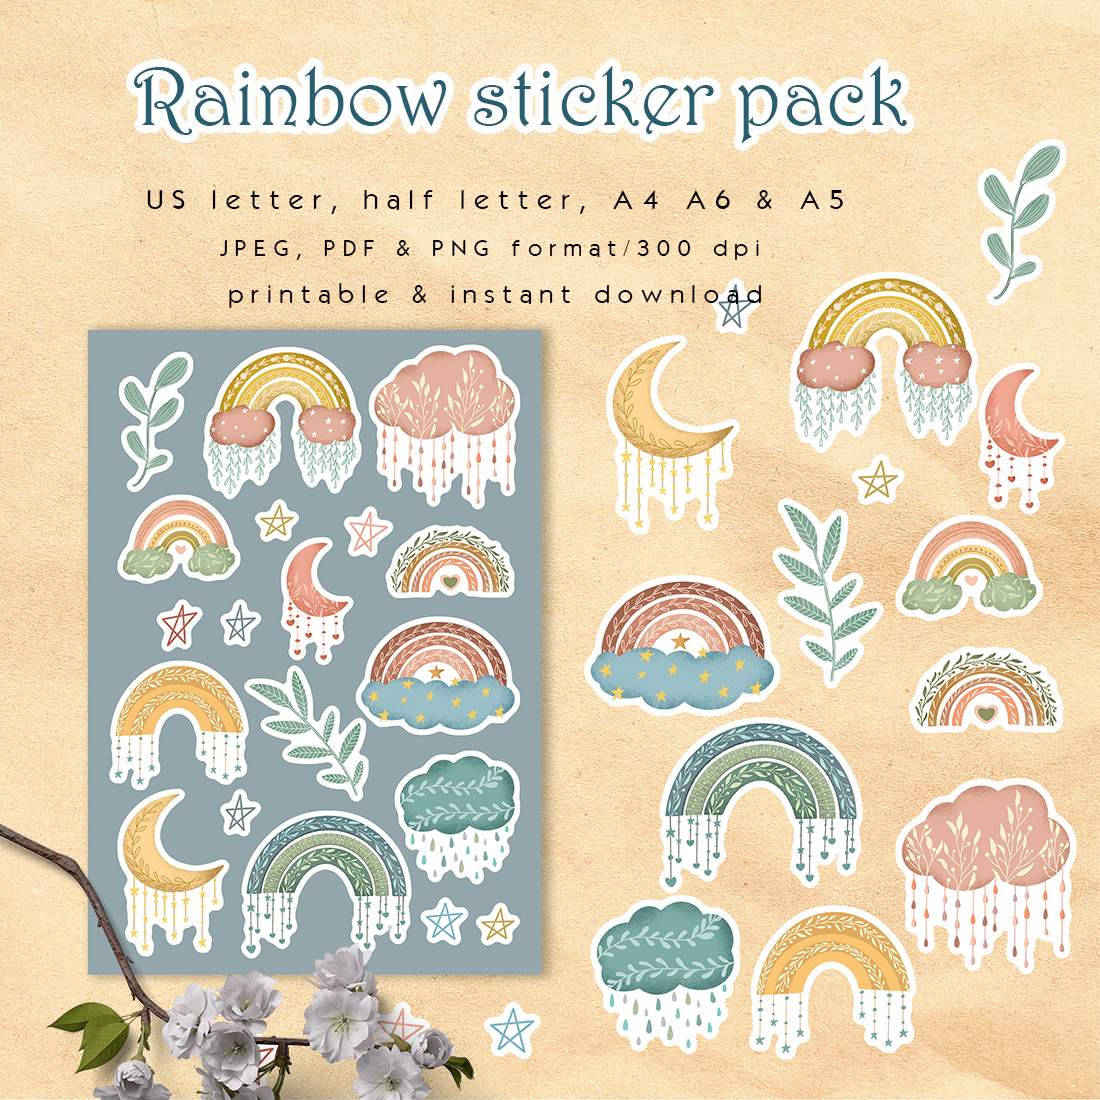 Rainbow sticker pack cover image.